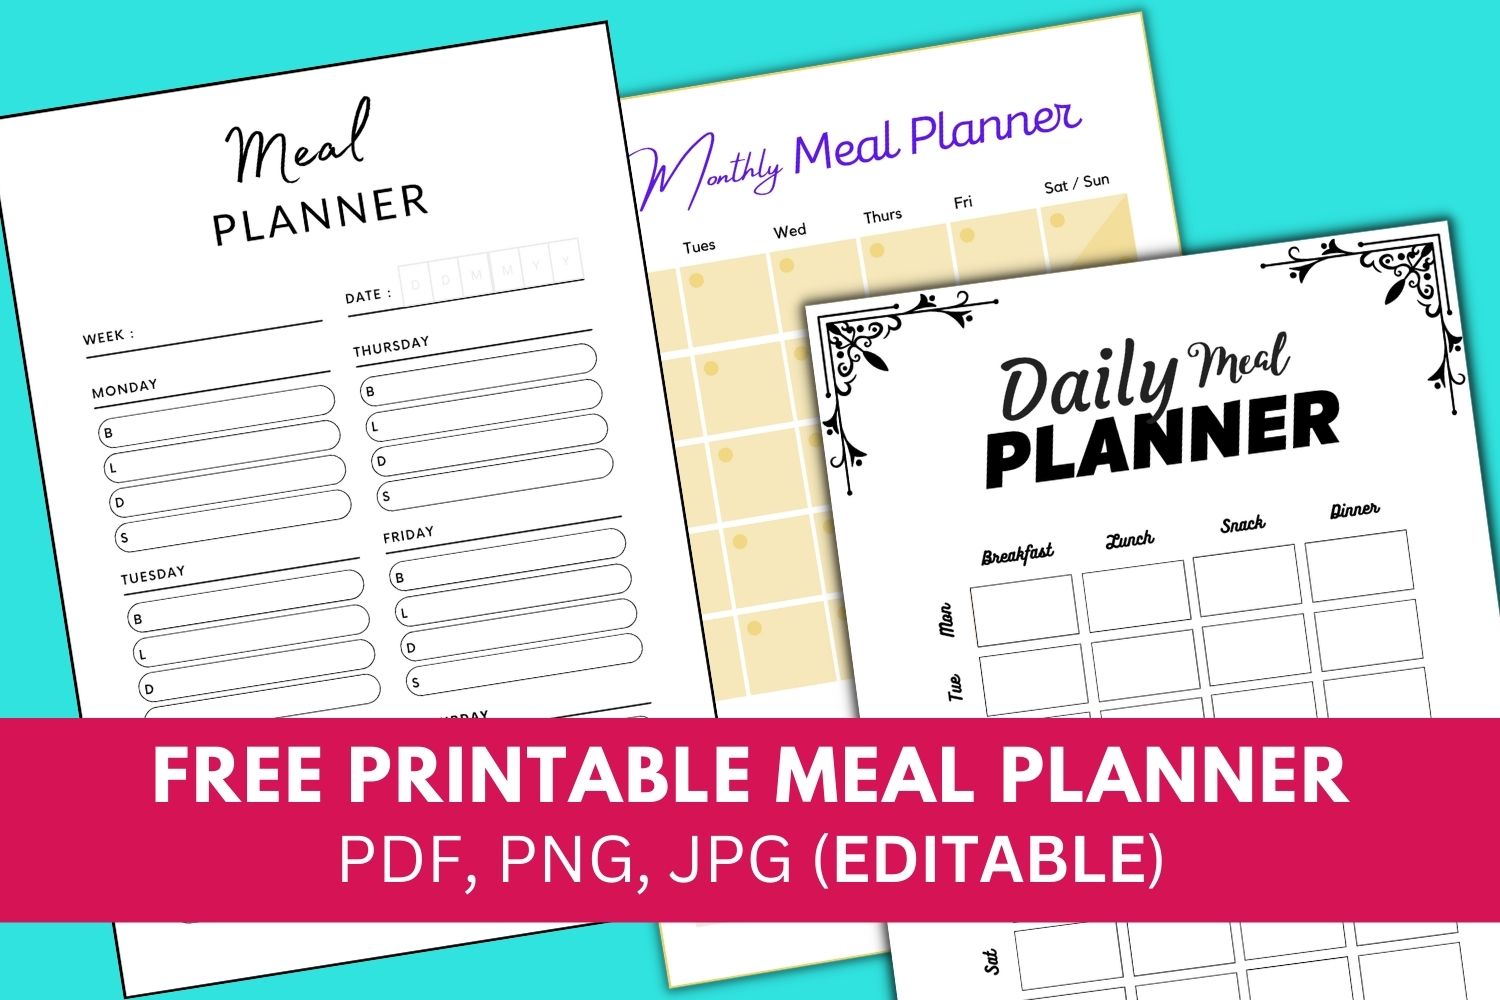 Weekly meal planner template. Printable Daily Meal Planner, Diet Meal planner, weekly, daily, healthy meal plan, template, menu, printable, free, pdf, diet, food, prep, family, grocery list, notes, print, download, online, simple.